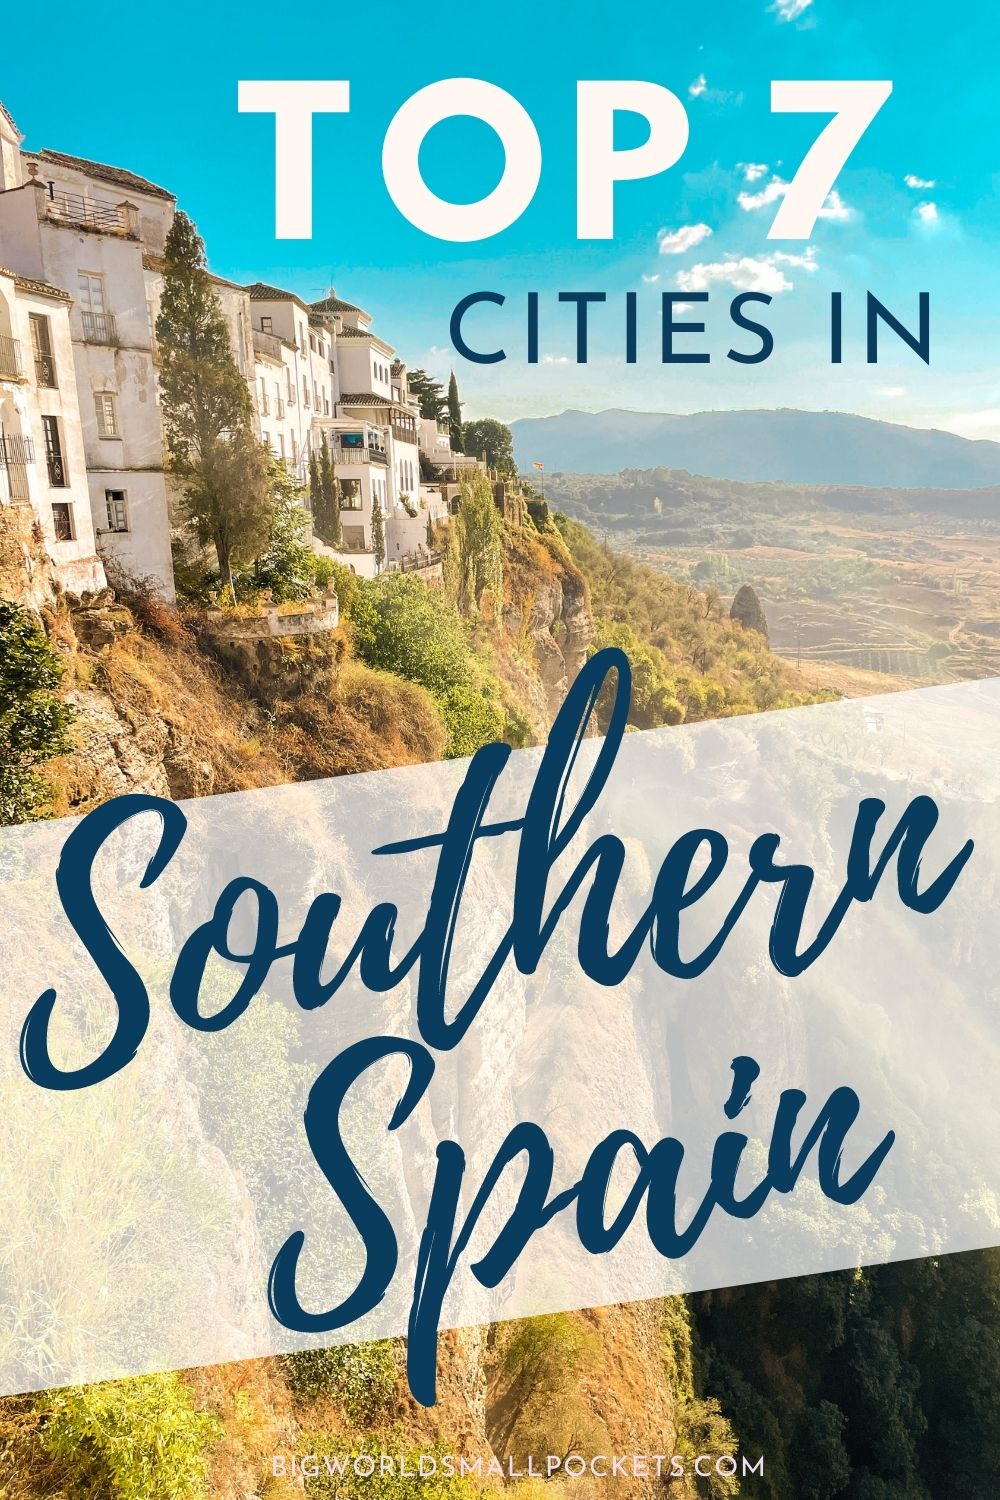 7 Cities in Southern Spain You Have to Visit